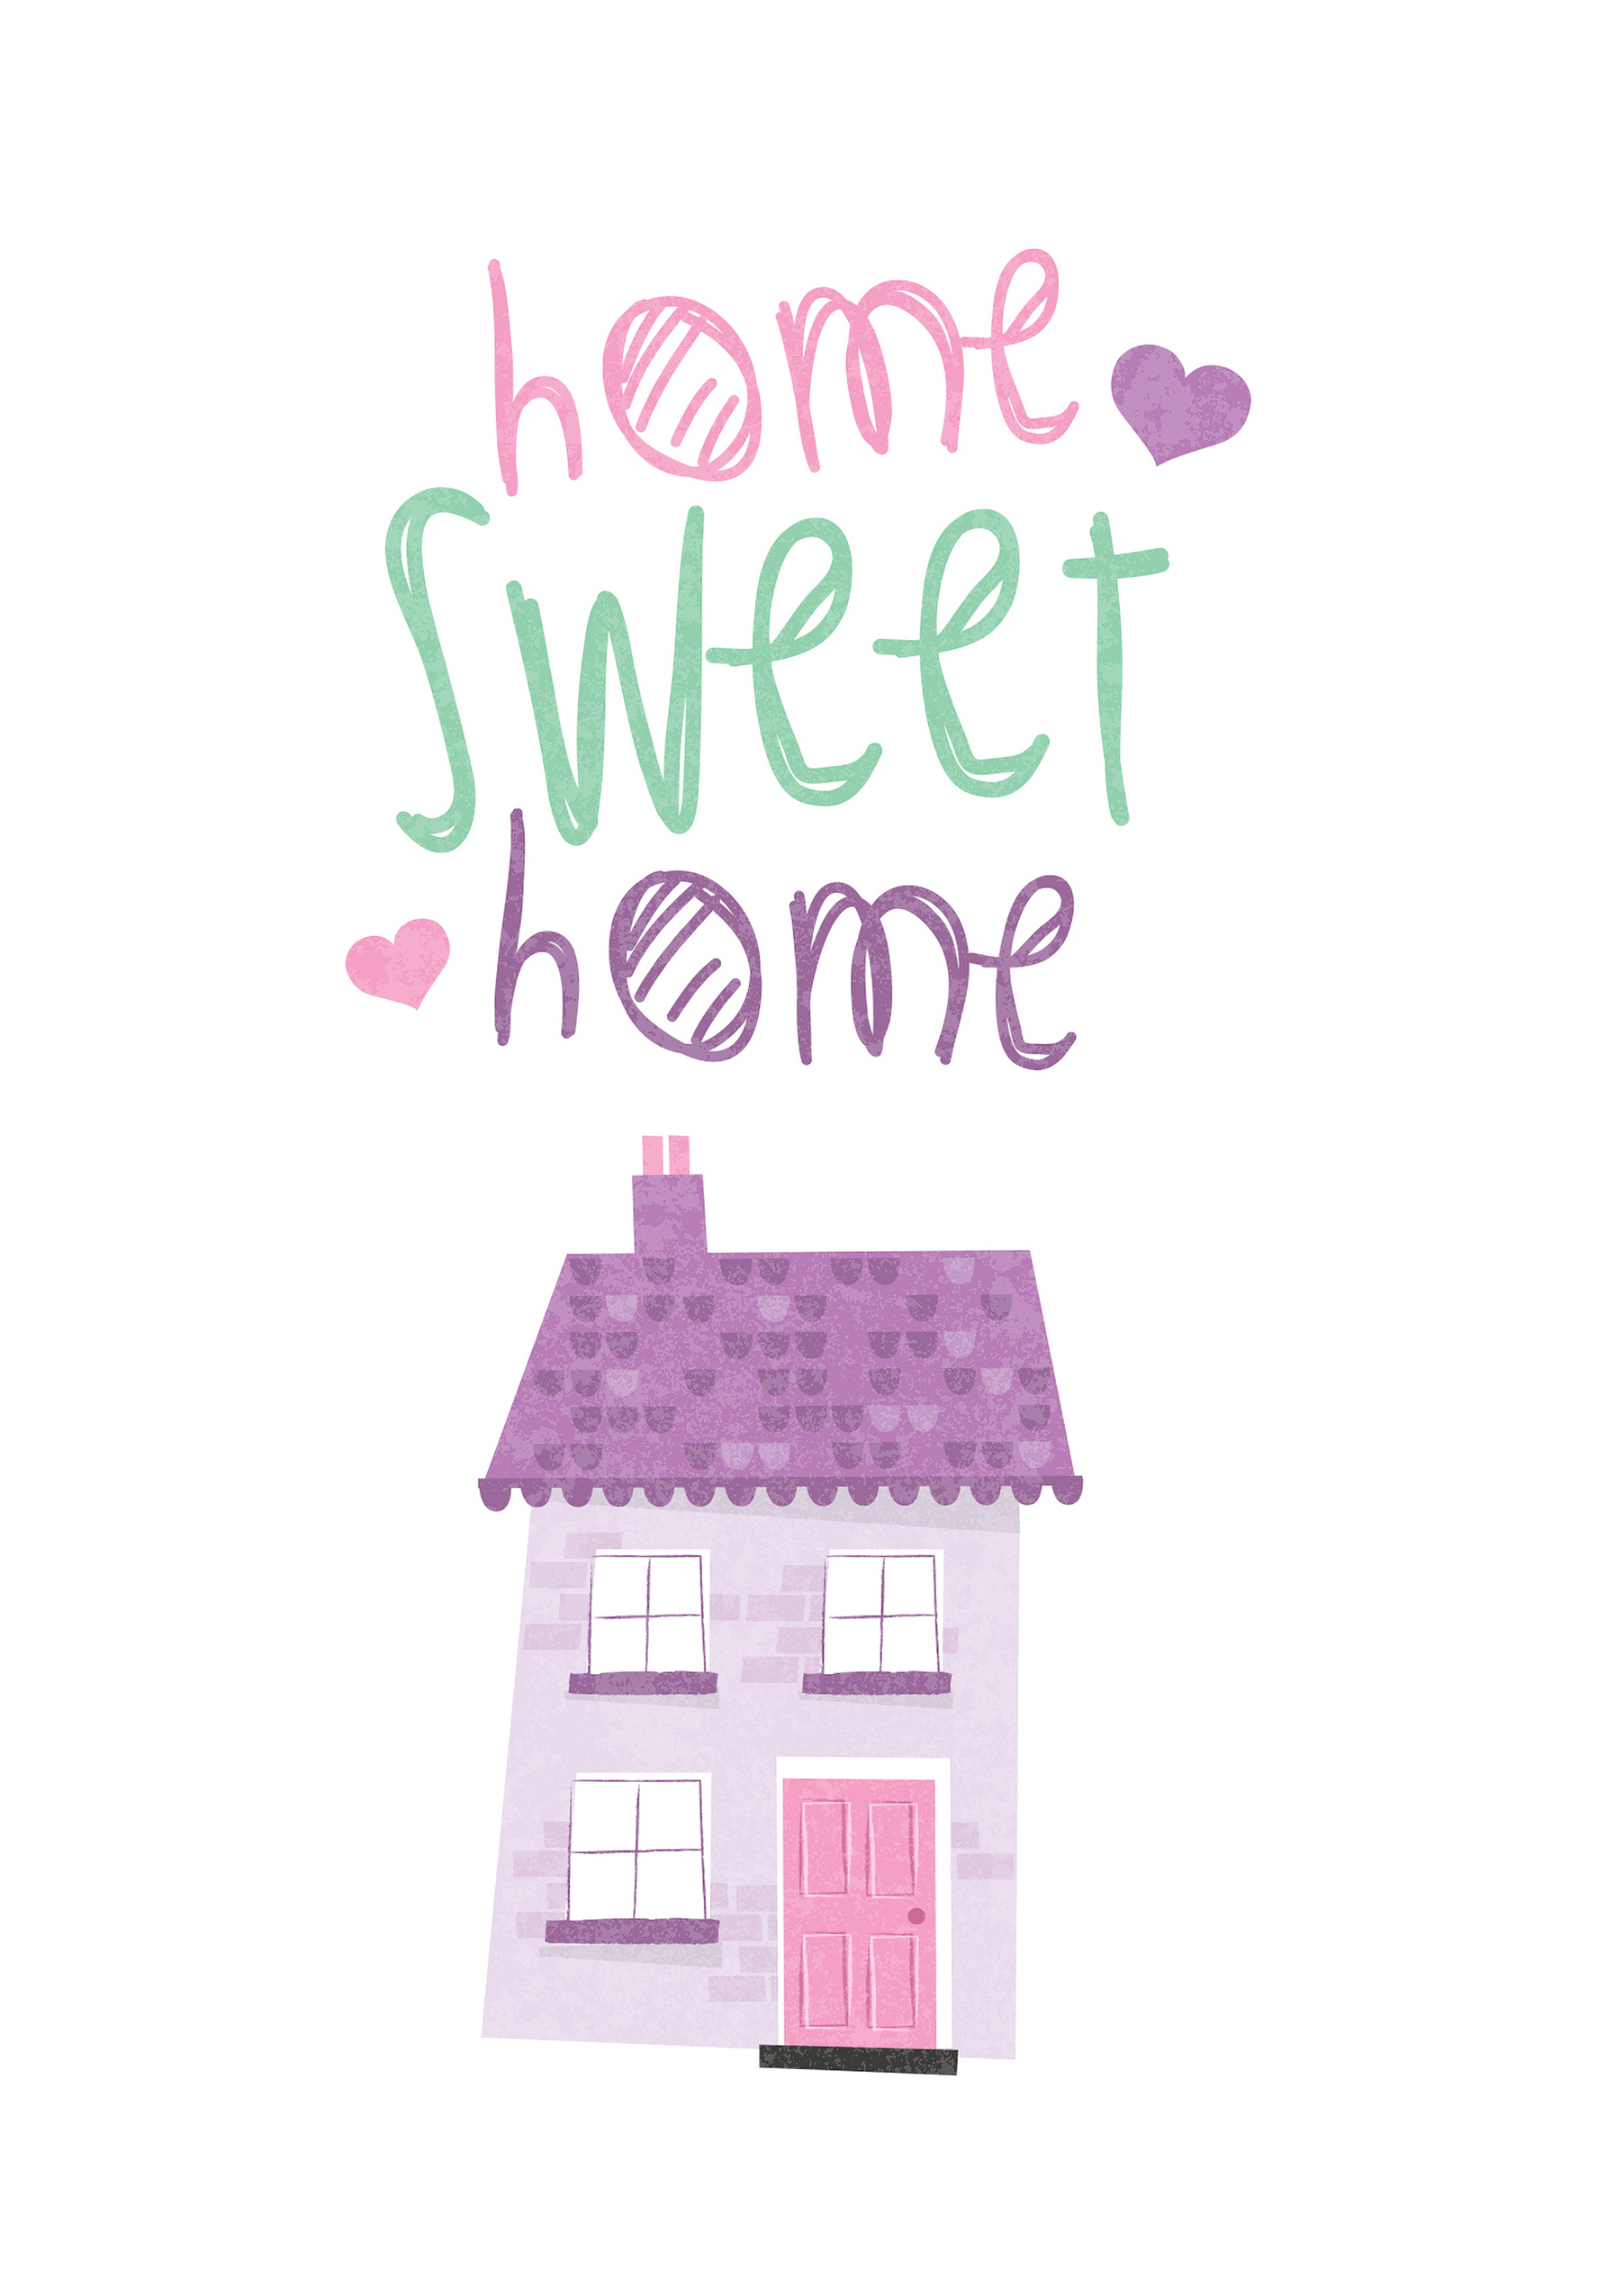 Home Sweet Home, Greetings Cards Delivered